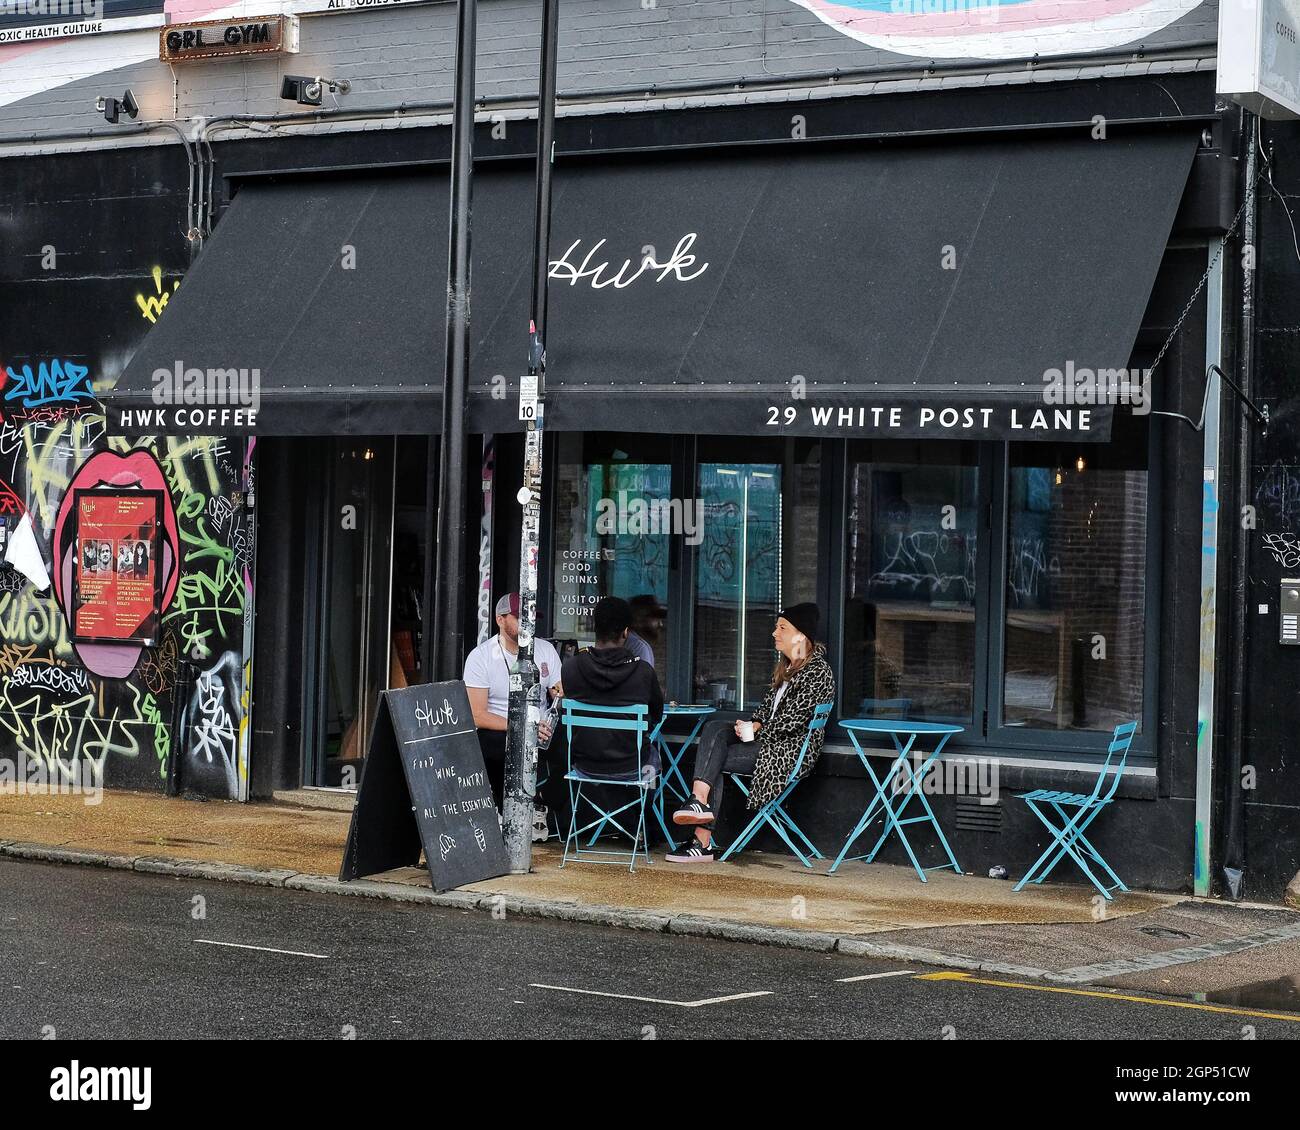 Exterior of Hwk coffee bar / cafe  in Hackney Wick, East London Stock Photo